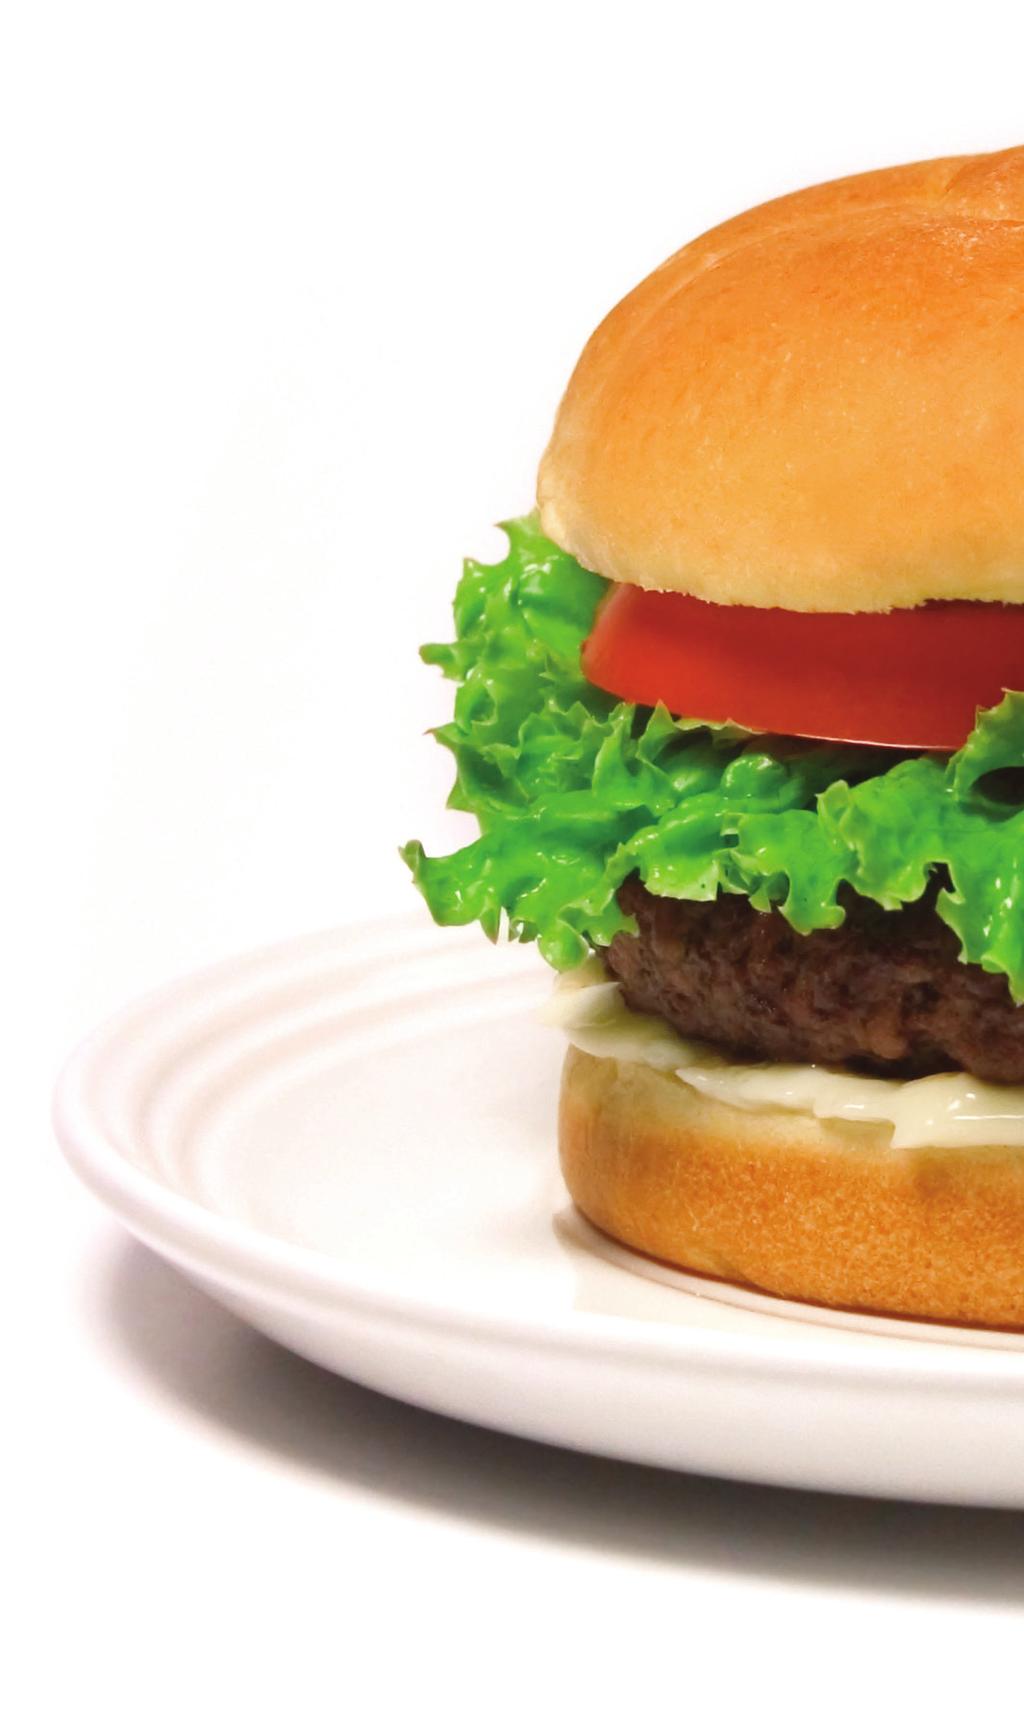 BROILED BURGERS Served on a white kaiser, whole wheat bun or gluten free bun with lettuce, onion, tomato, a pickle and your choice of side dish. Mayo and relish upon request.